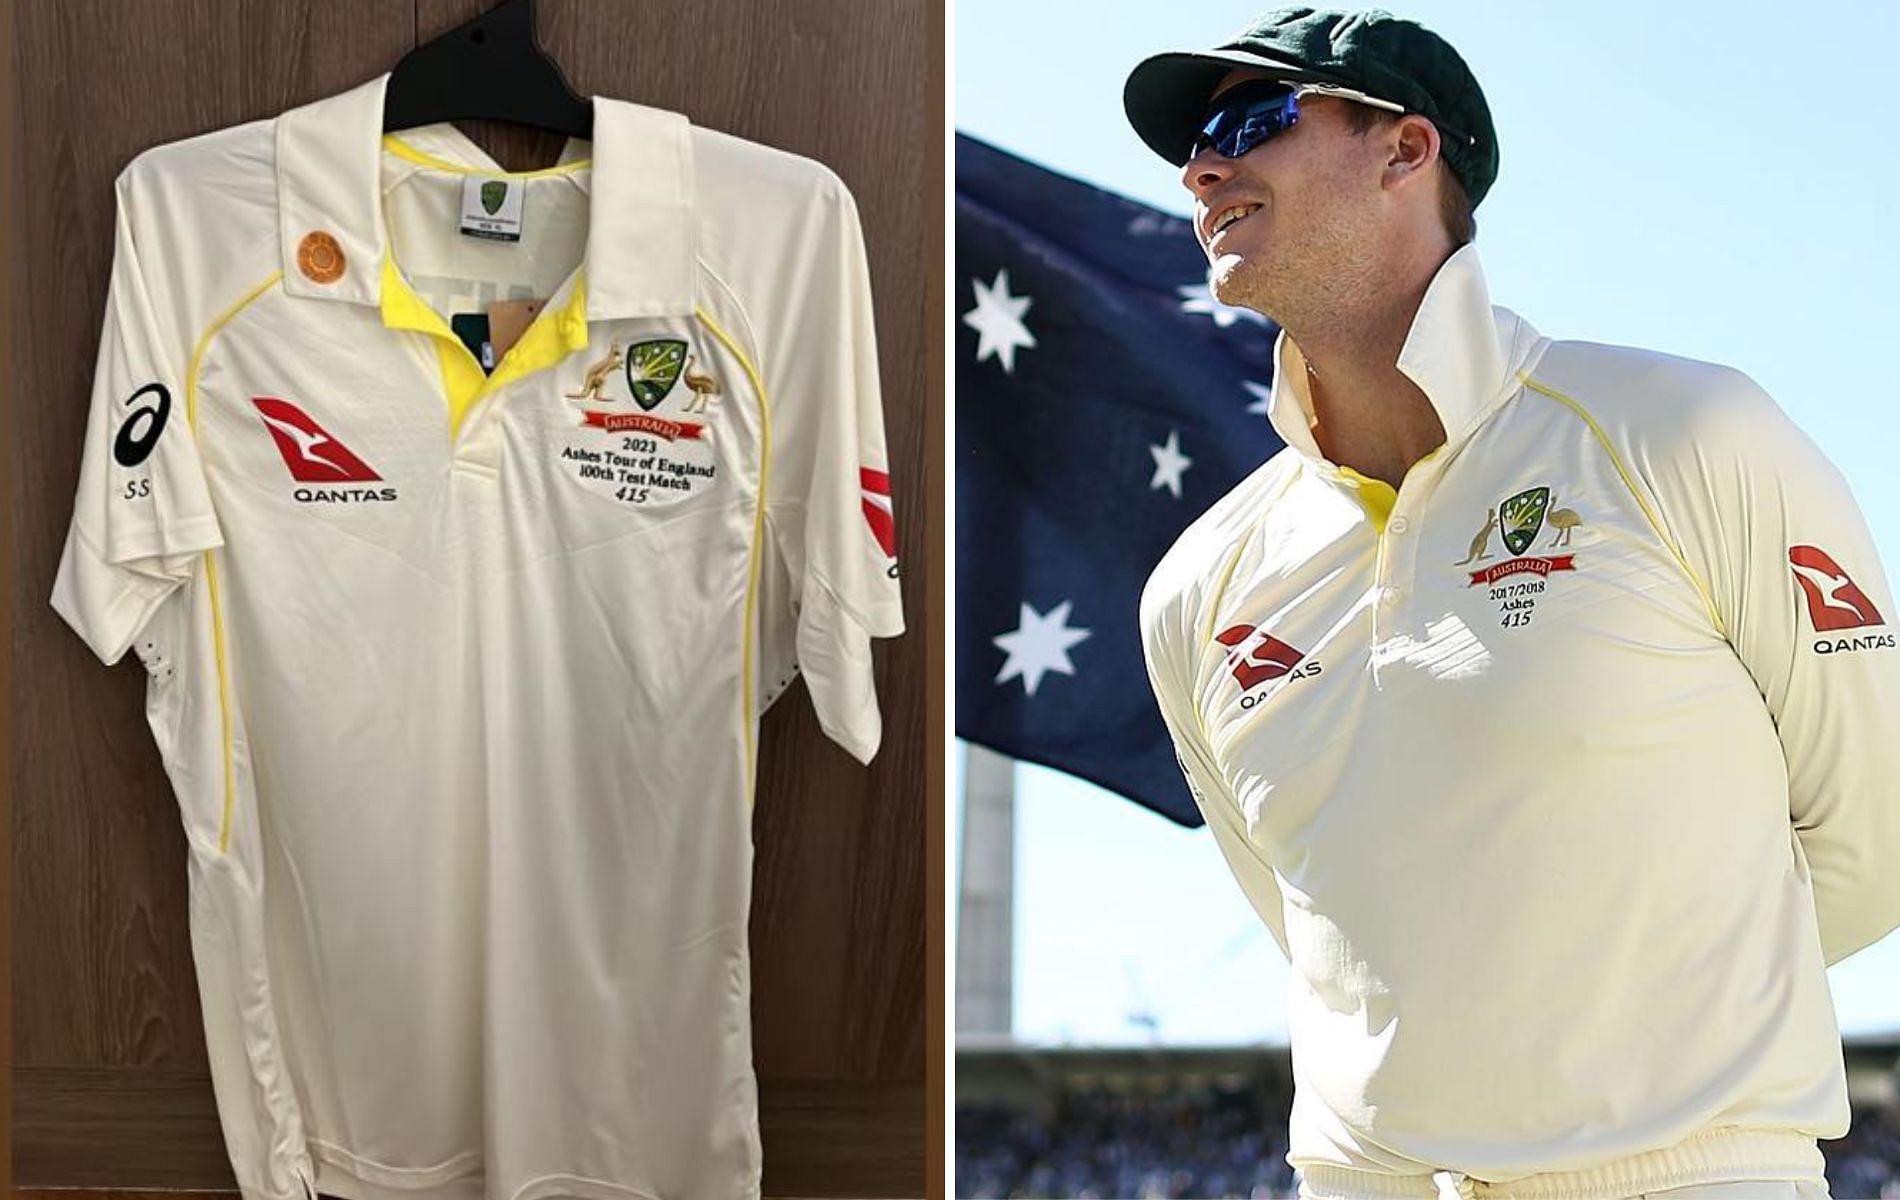 Steve Smith (R) is all set to play his 100th Test. (Pics: Instagram)